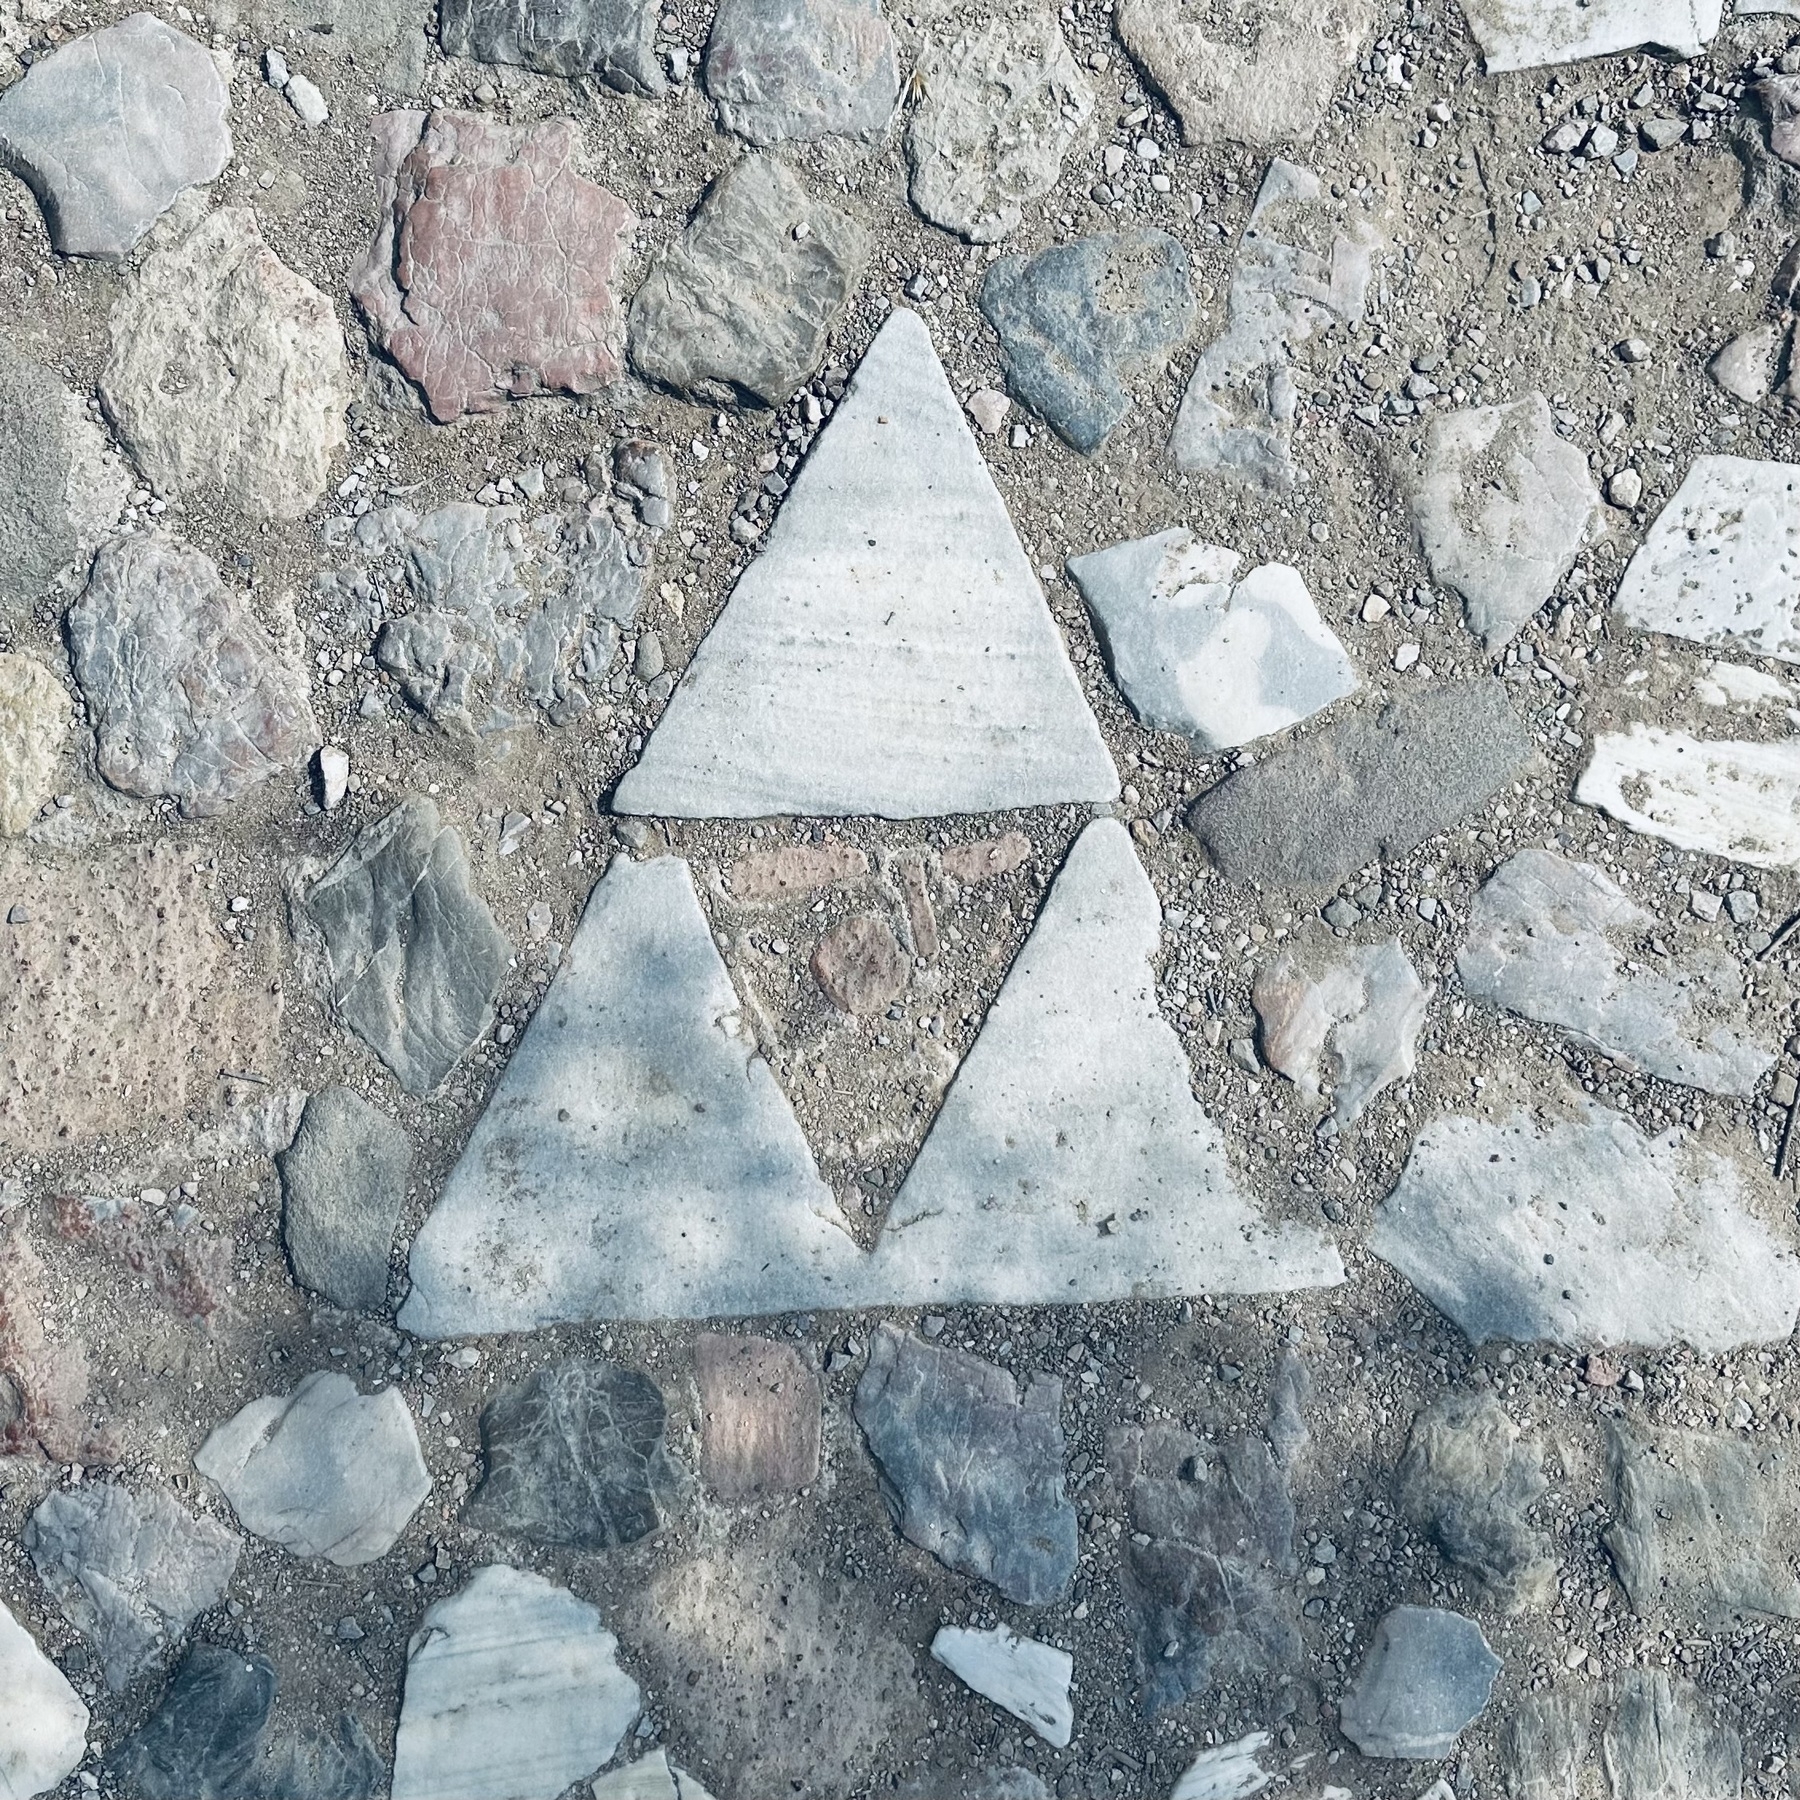 Three stone triangles embedded in the ground.